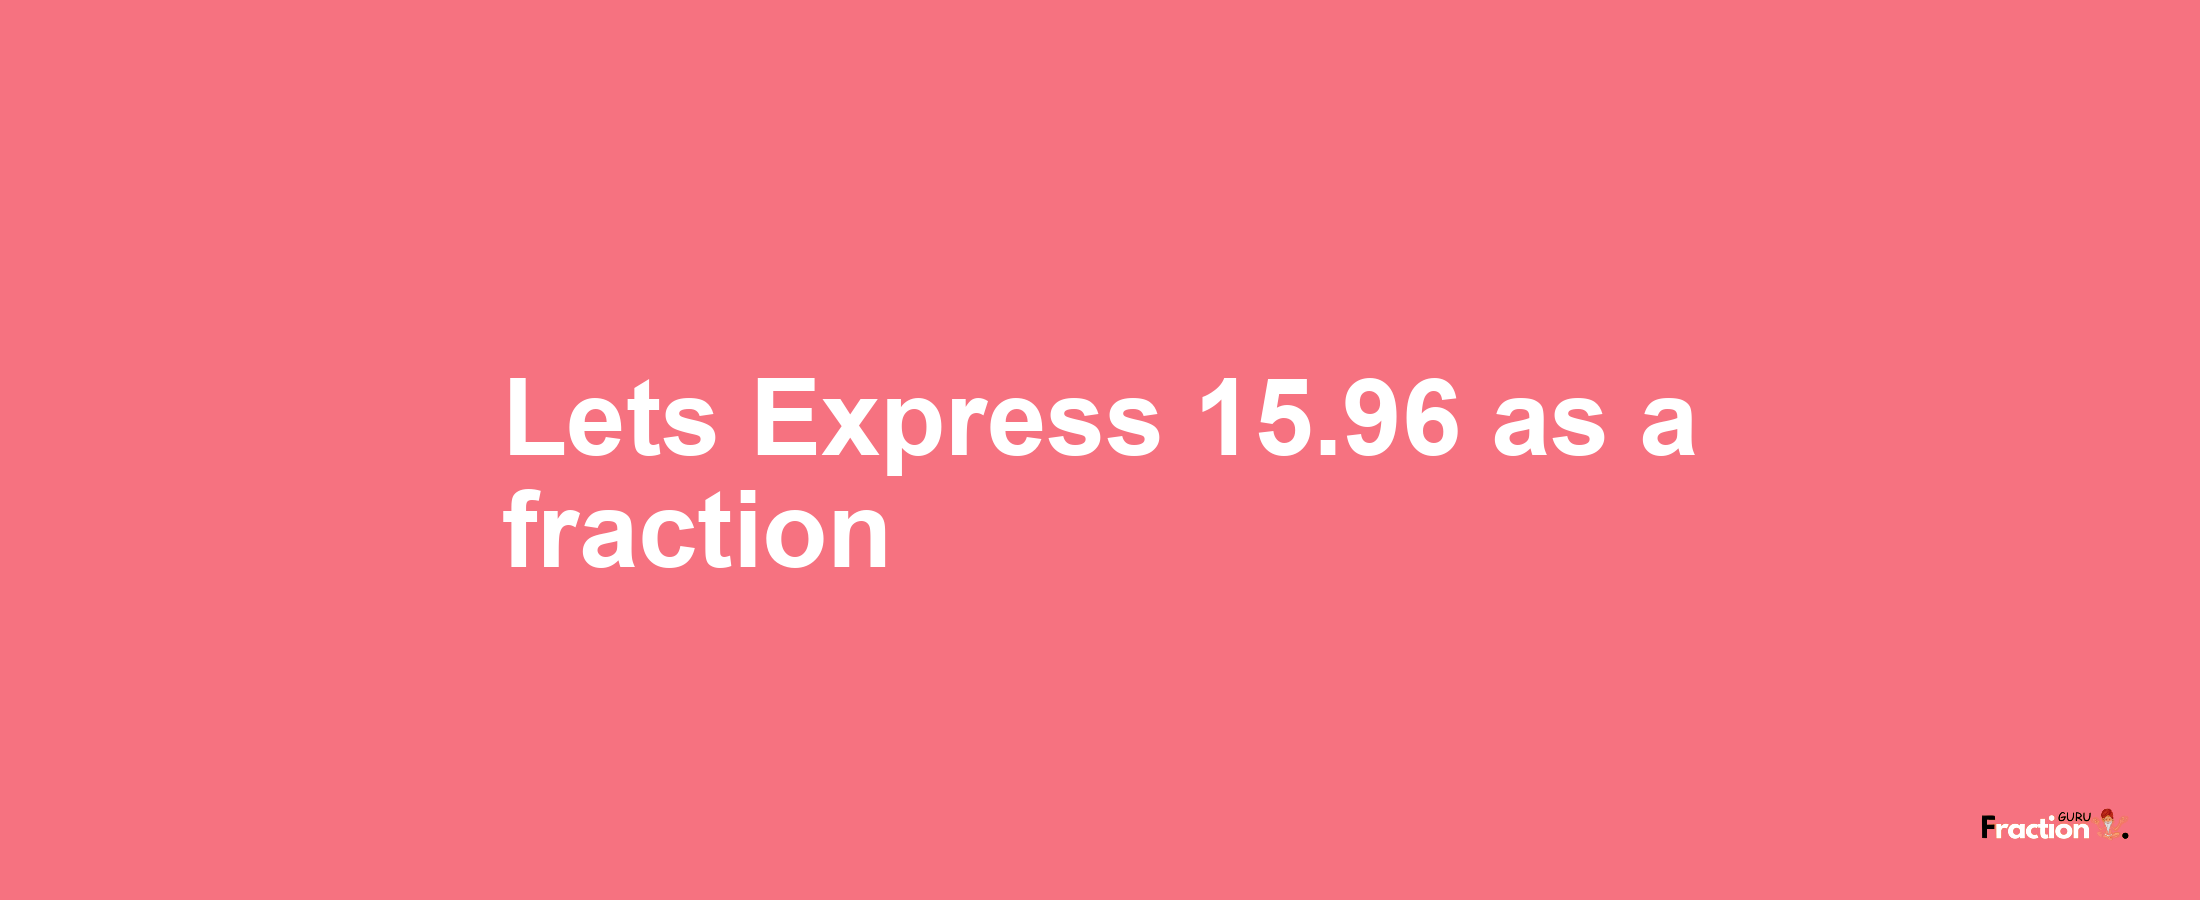 Lets Express 15.96 as afraction